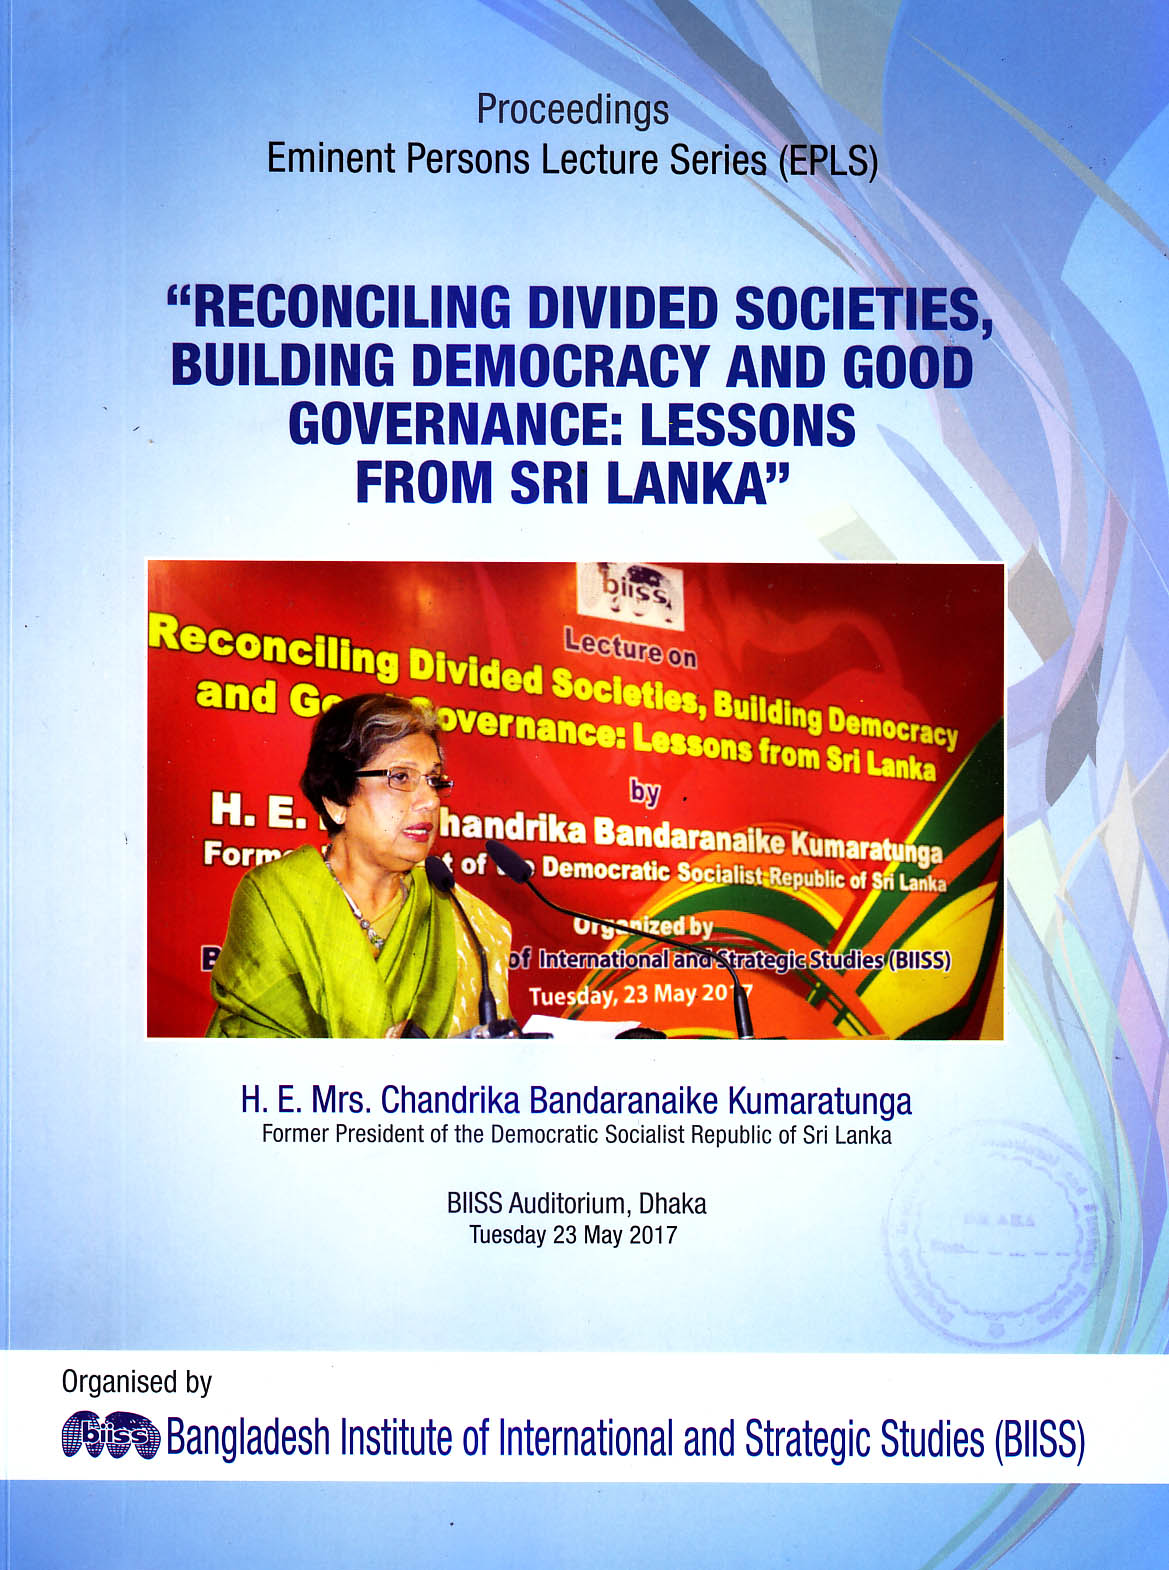 Proceedings EPLS "Reconciling Divided Societies, Building Democracy and Good Governance : lessons from Sri Lanka"